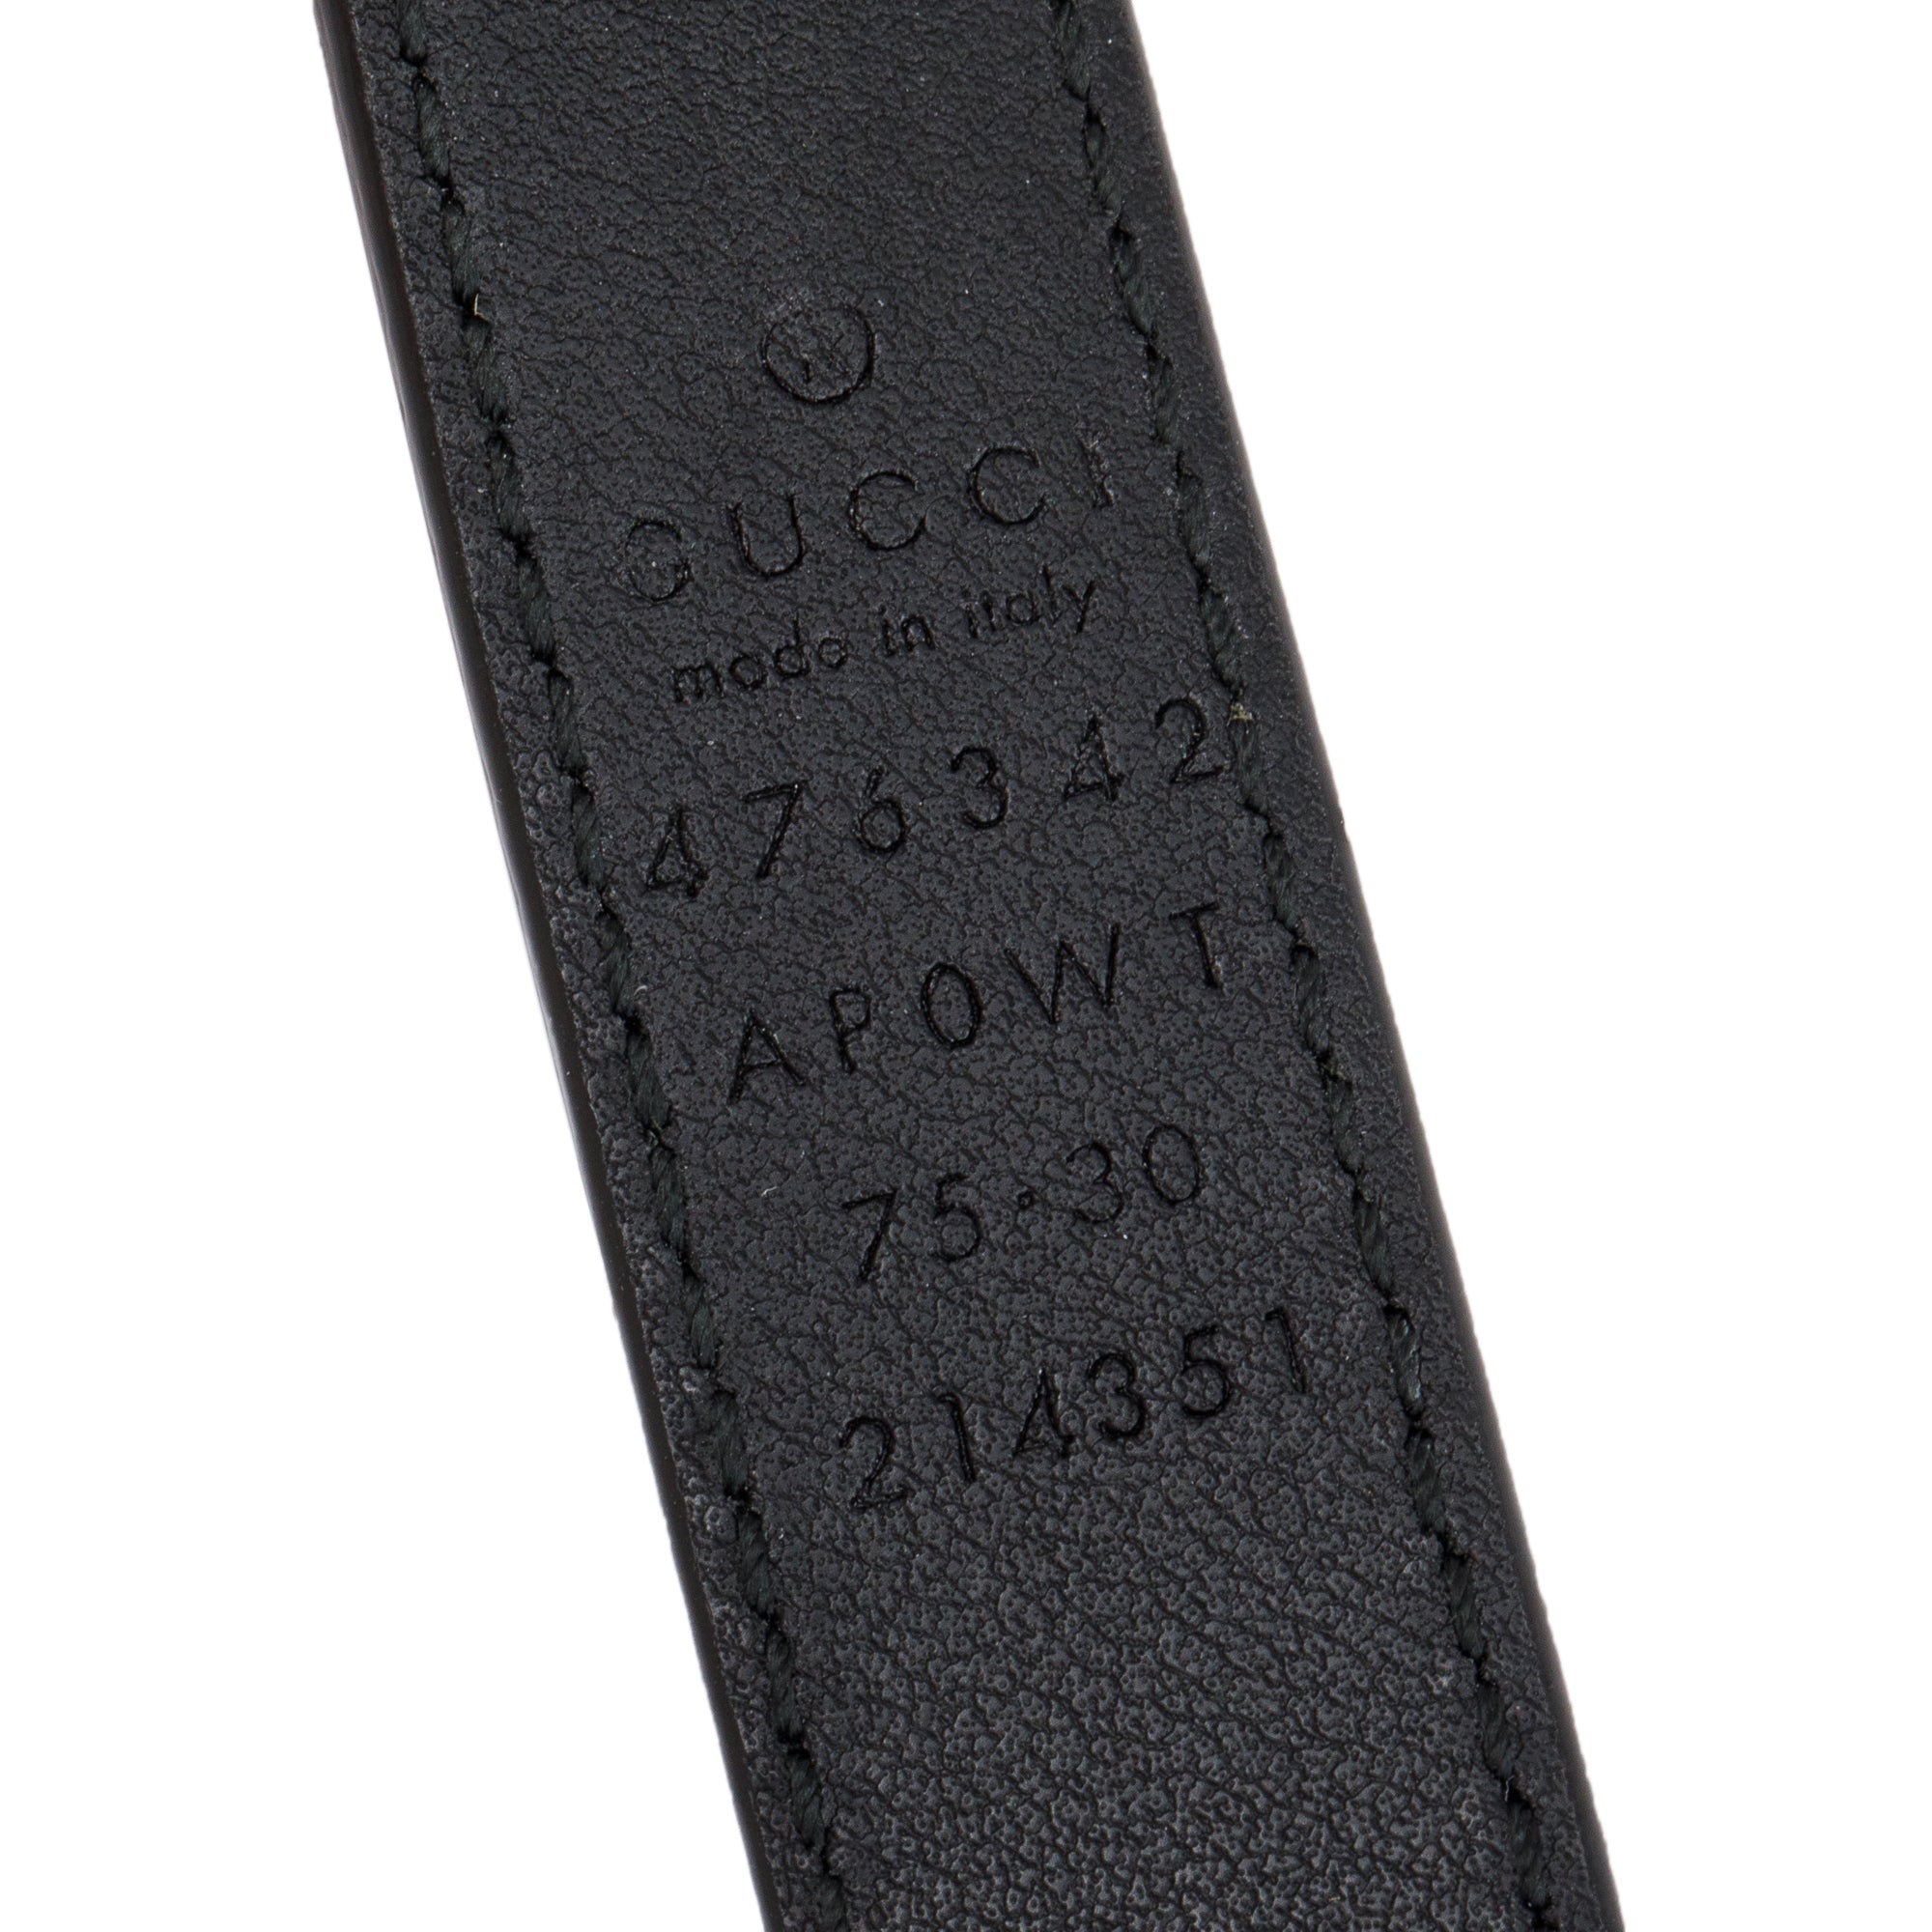 Black Leather Belt With Pearl Double G Buckle